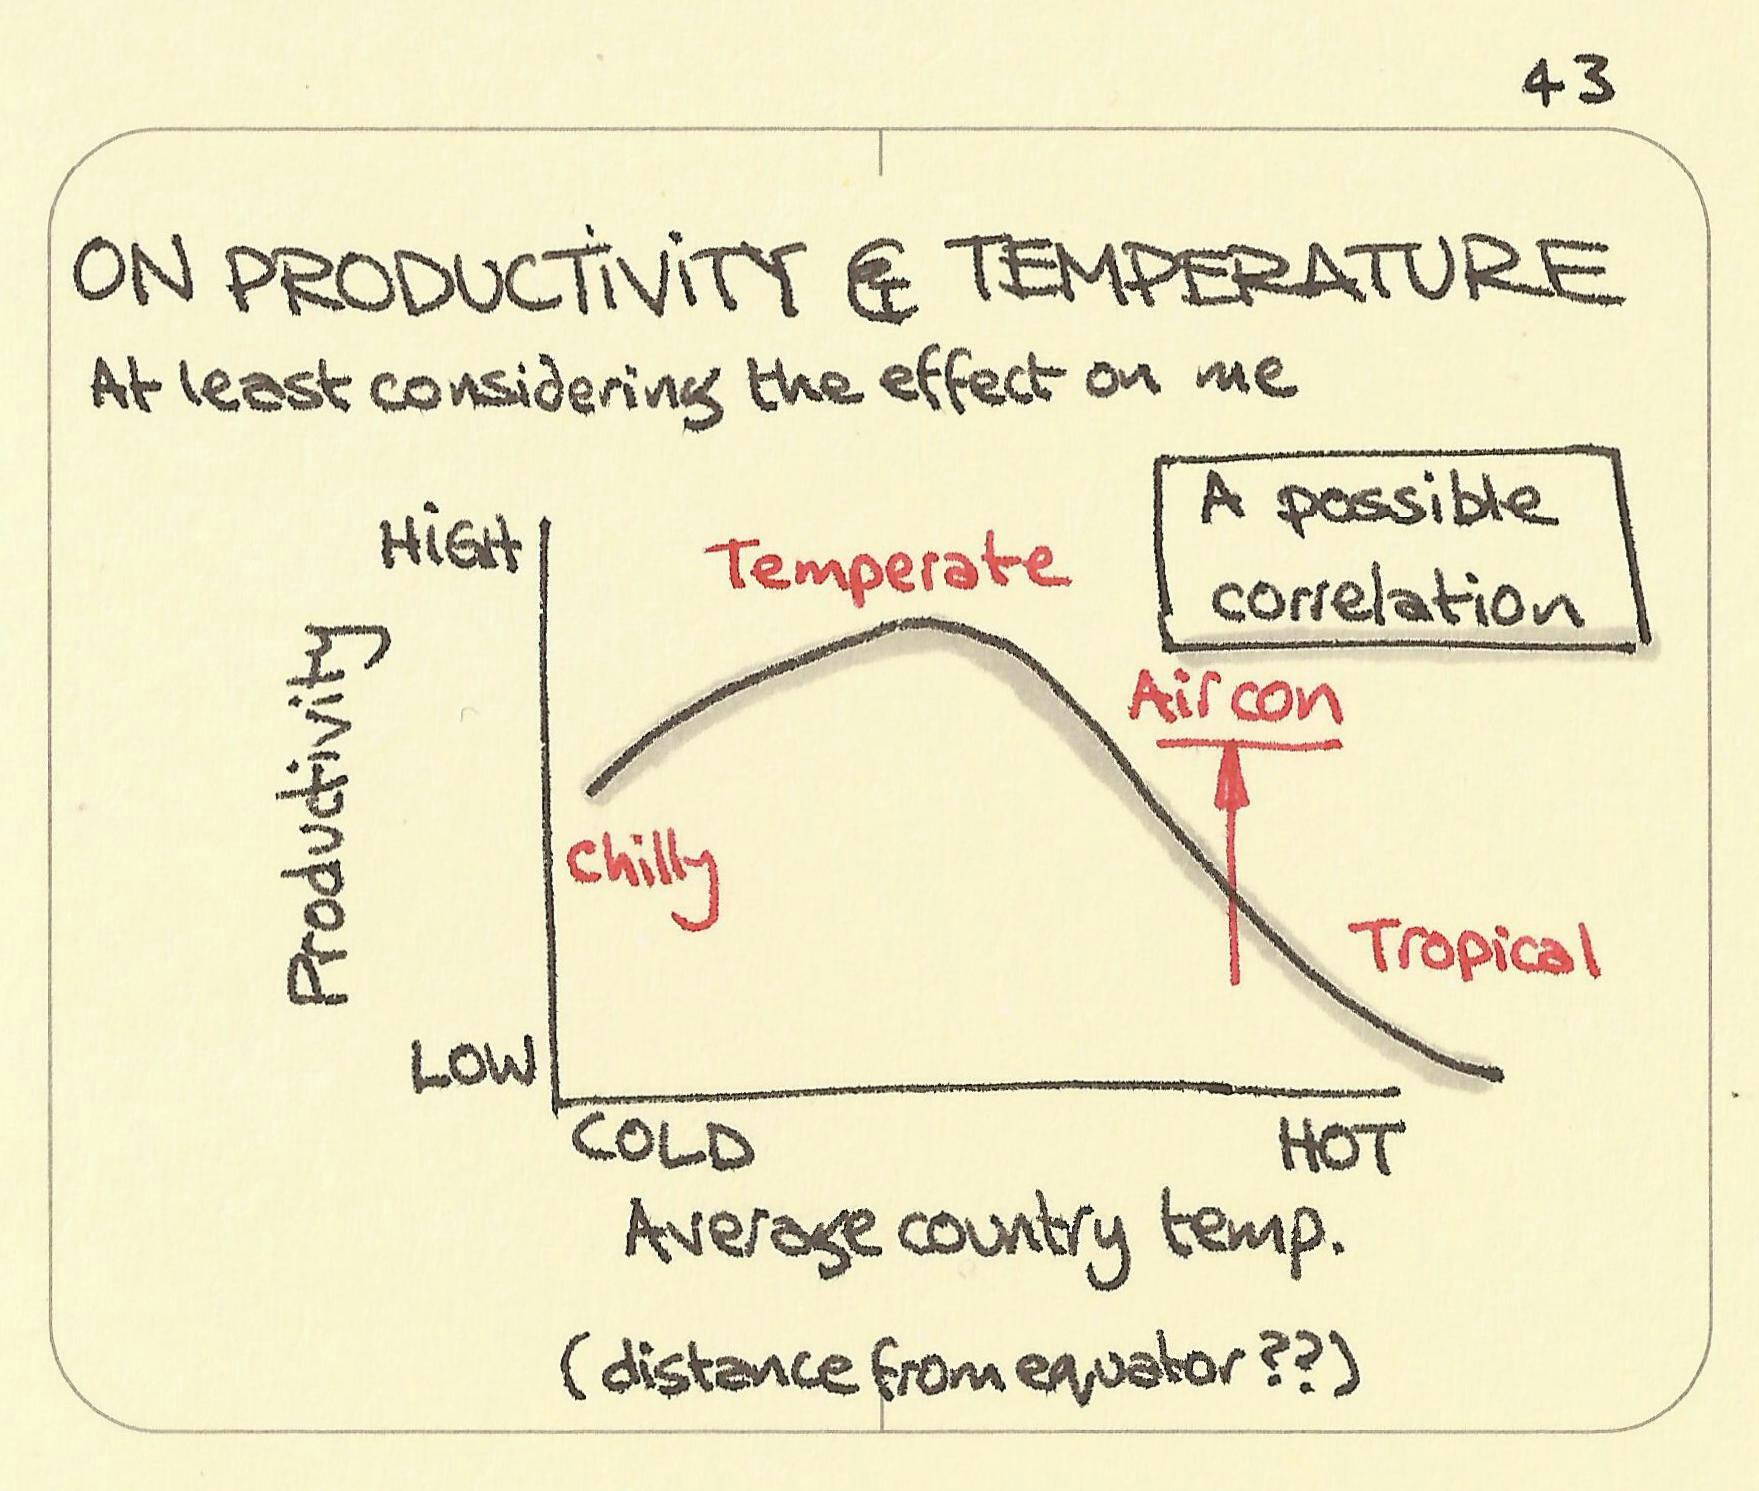 On productivity and temperature - Sketchplanations